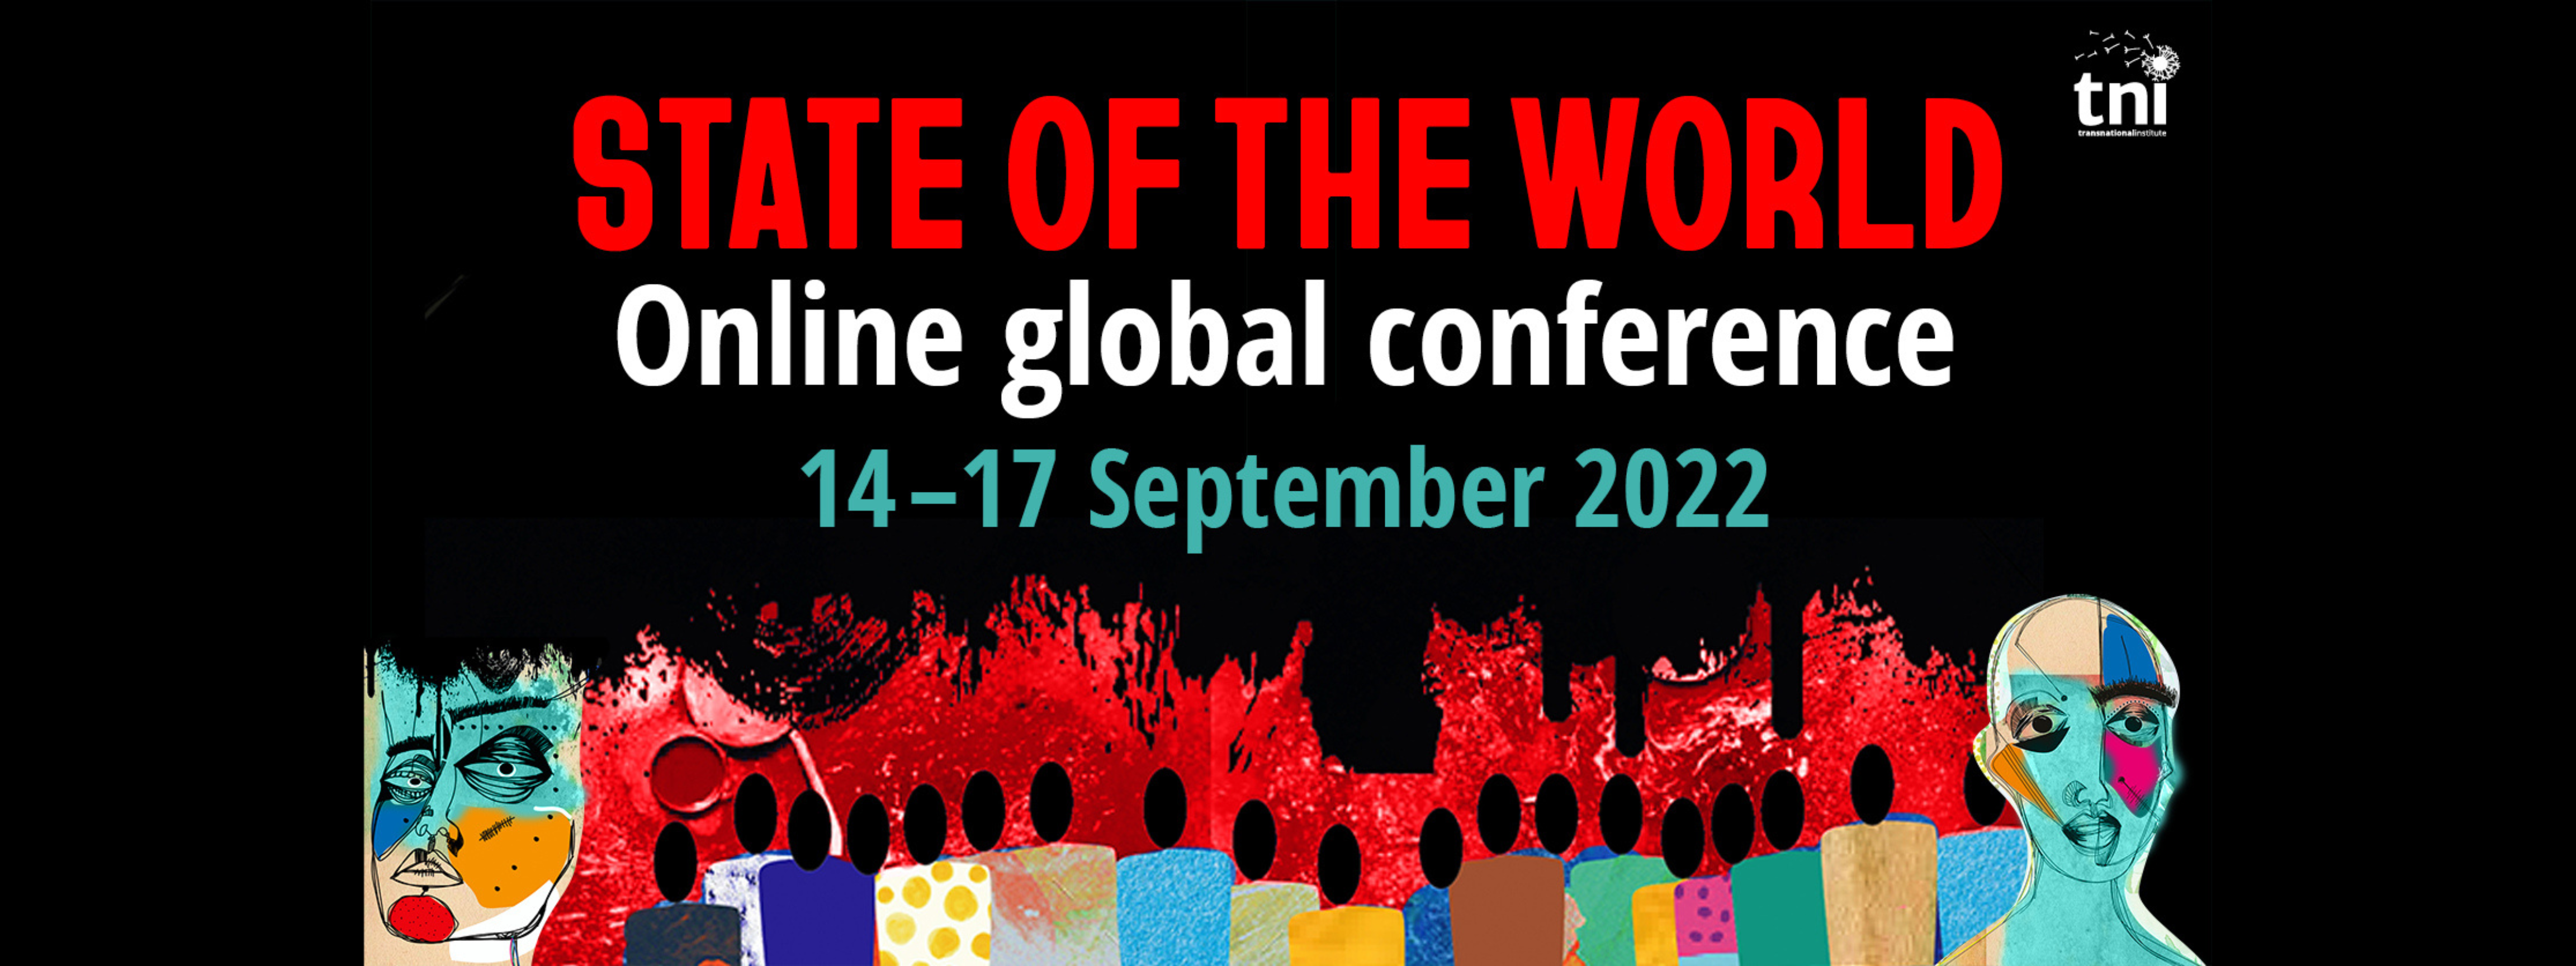 State of the World 2022: Online Global Conference